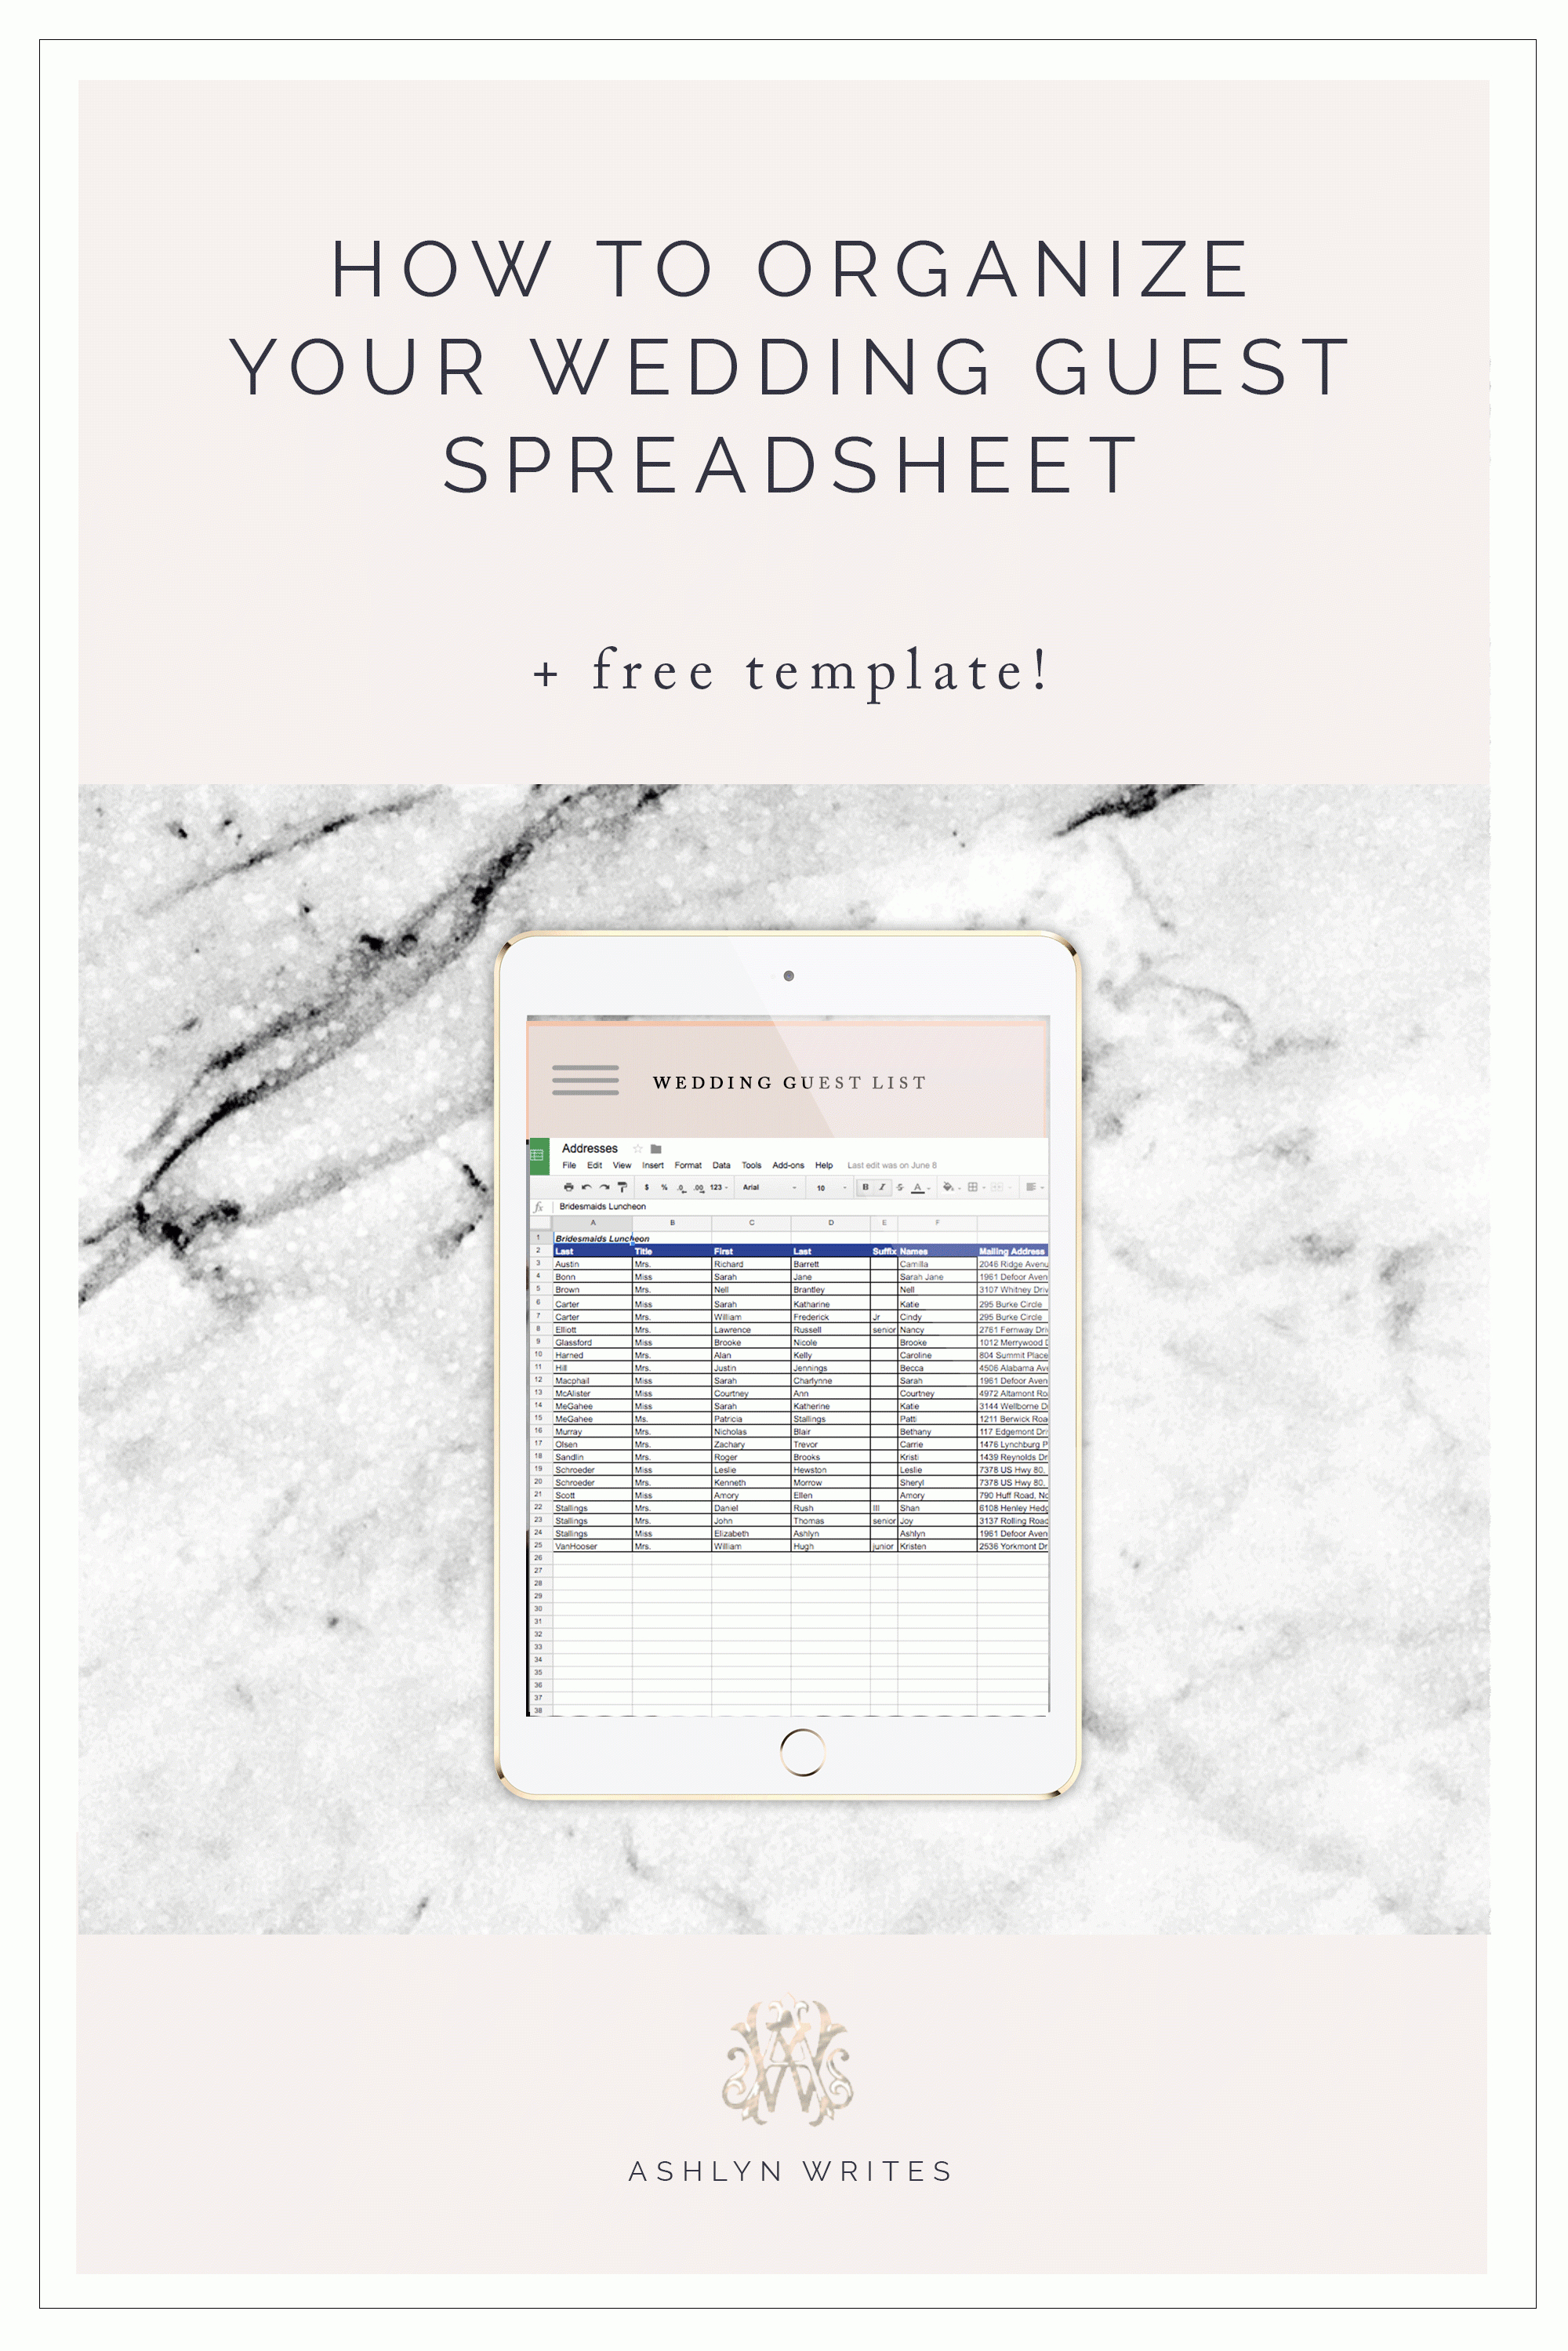 Guest List Spreadsheet For How To Organize A Wedding Guest List Spreadsheet + Free Template